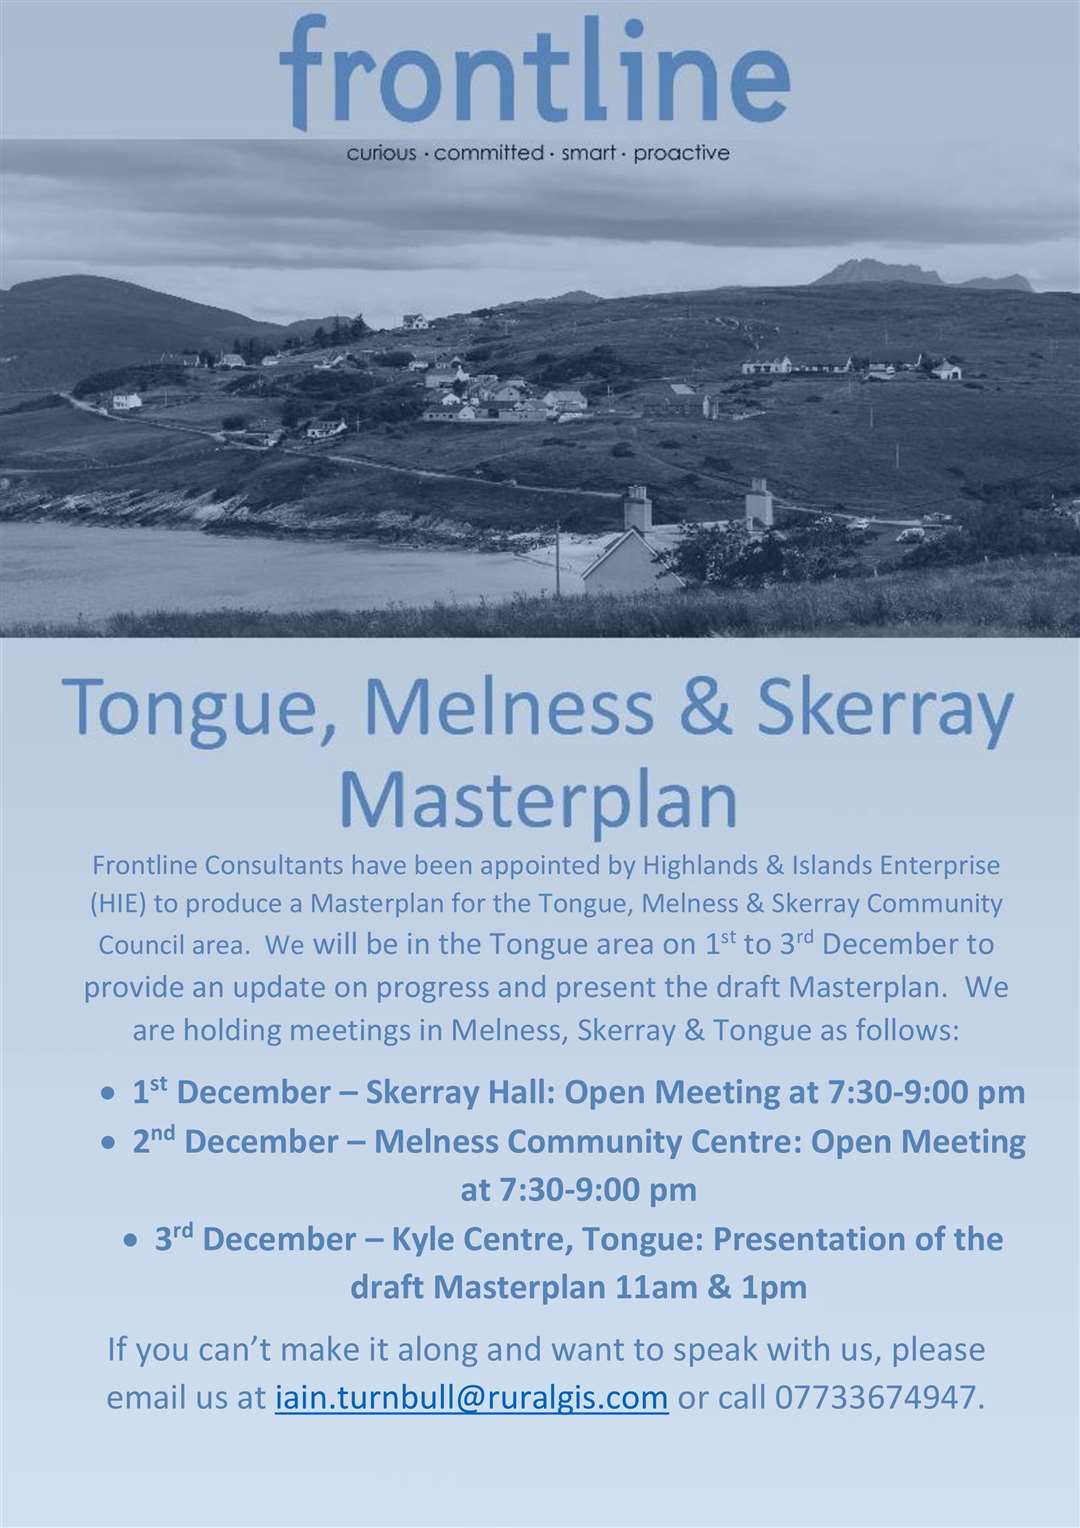 The meetings are being held in Skerray, Melness and Tongue.